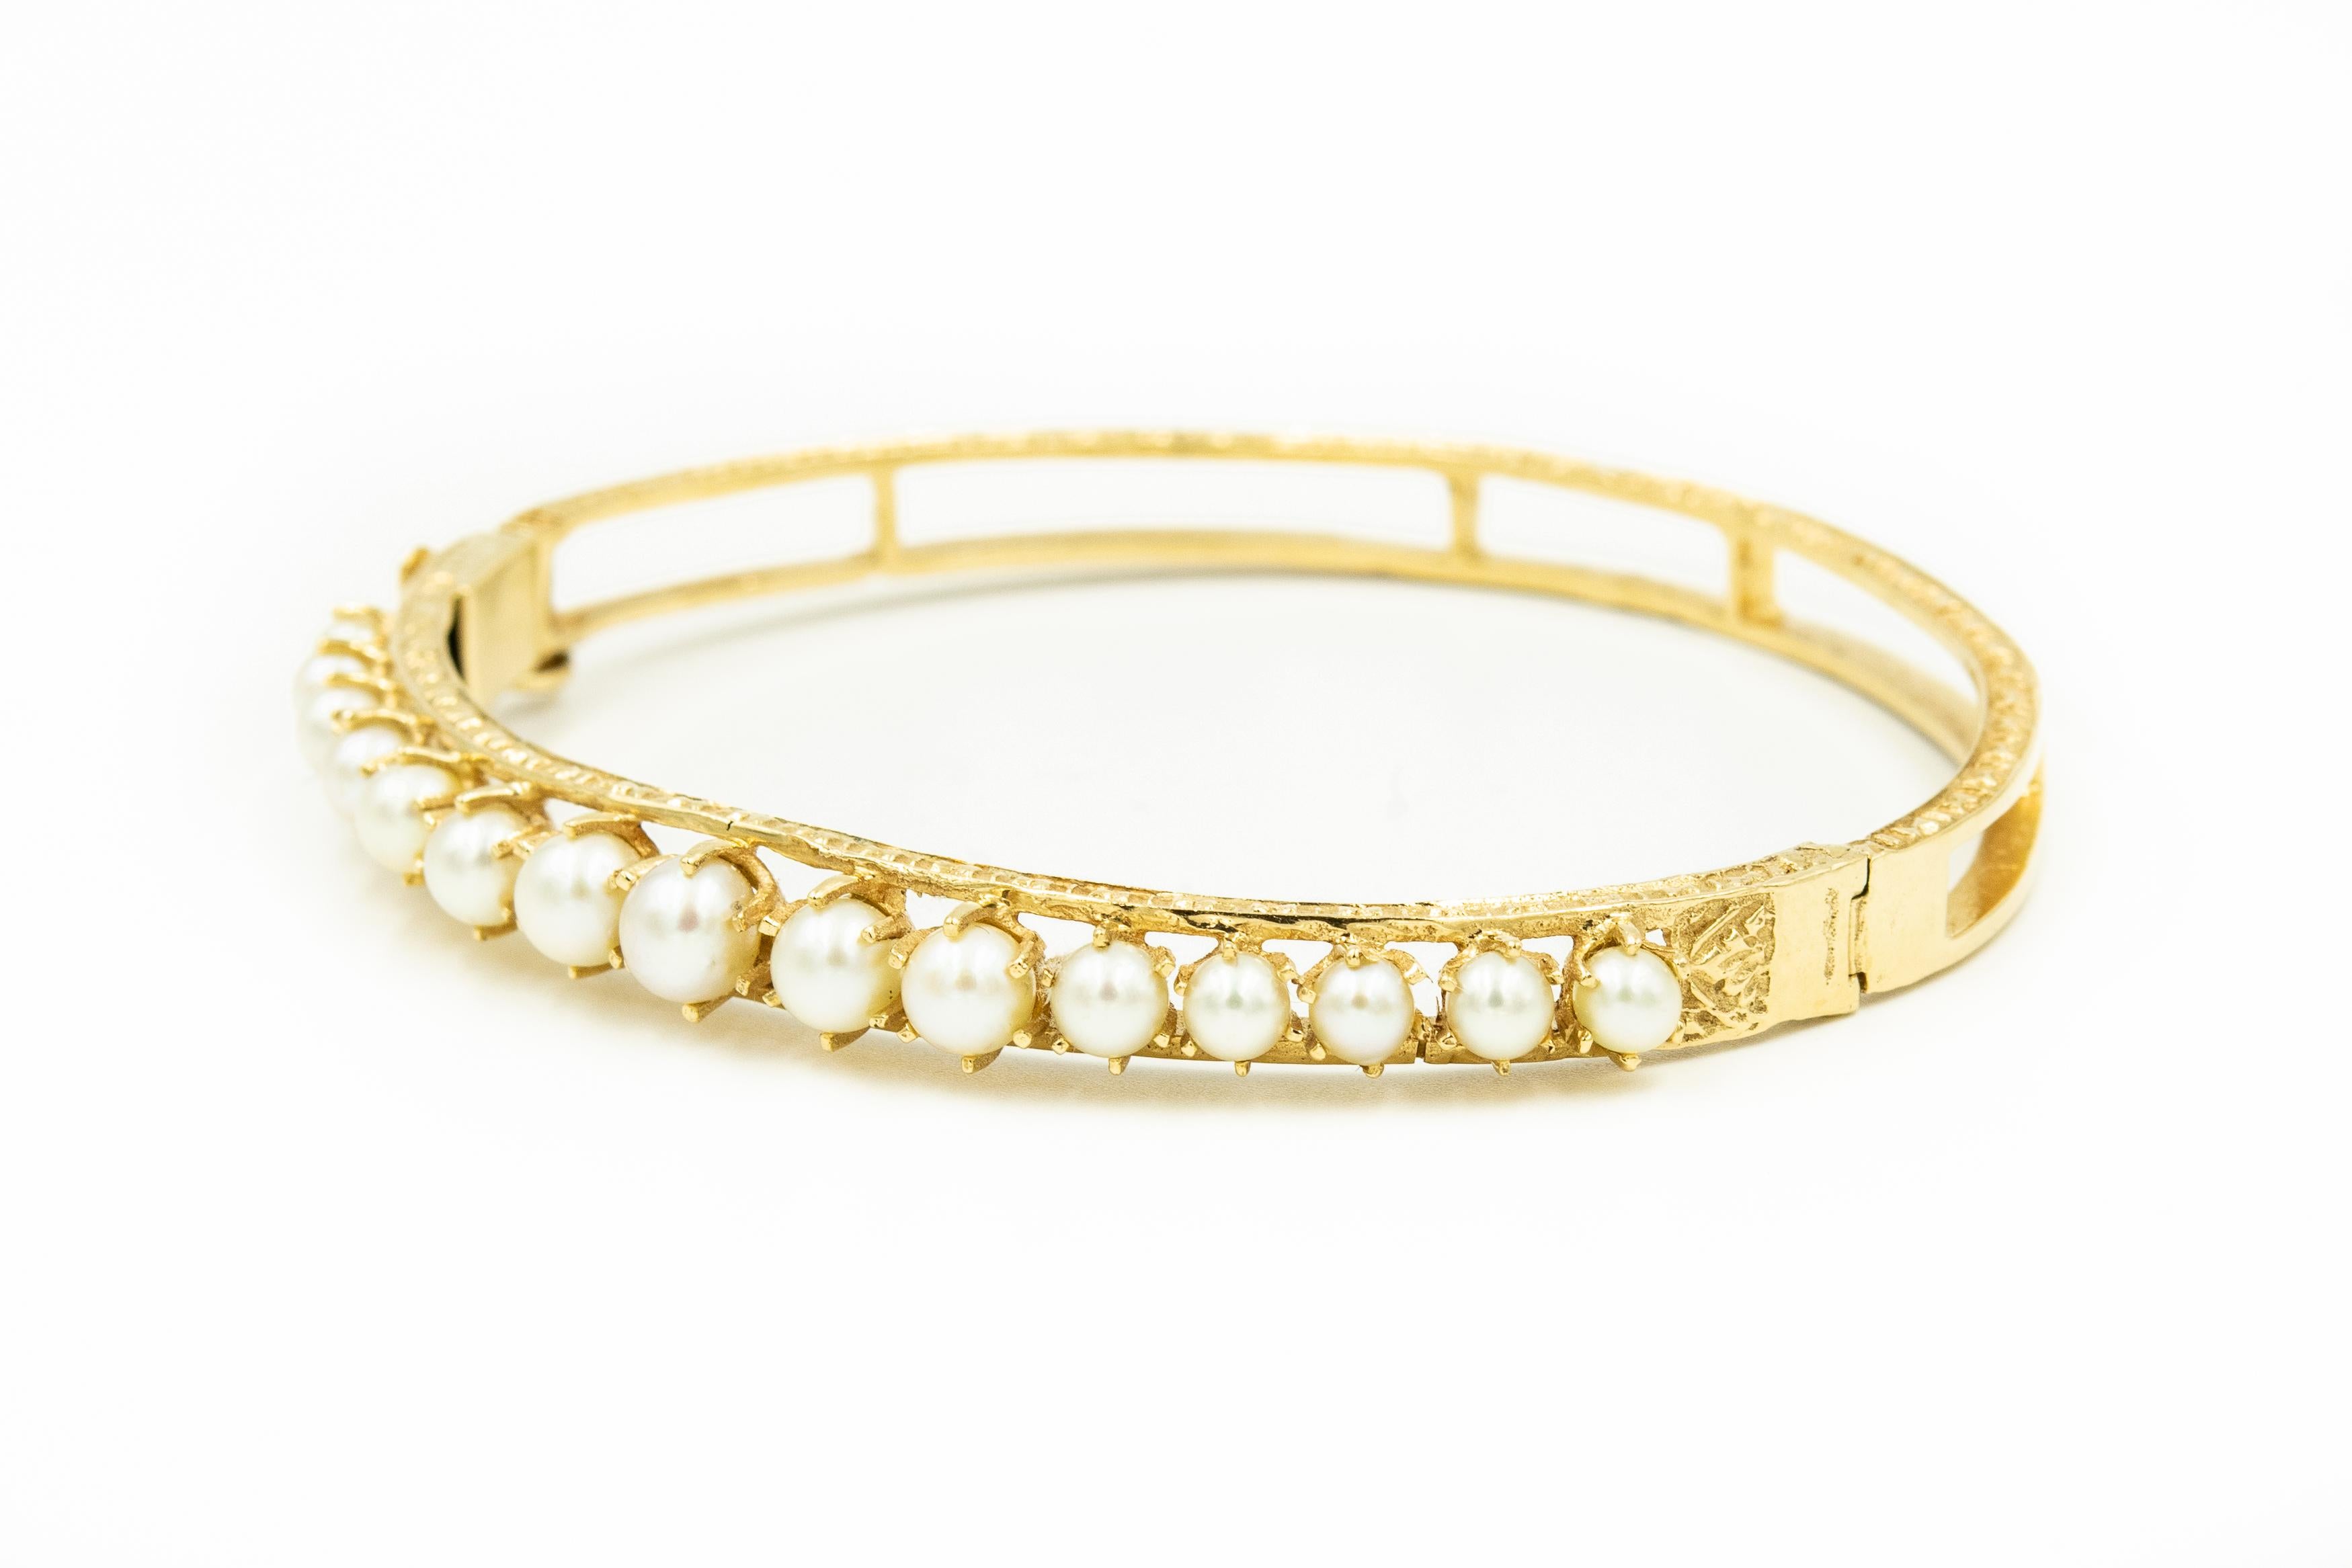 Classic 1950s elegant graduated cultured pearl bangle featuring 15 prong set cultured pearls (5.5mm - 3.7 mm) set in a 14k yellow gold bangle with etched sides.  The back is open.  The bracelet hinges open and closes with a push button clasp and an